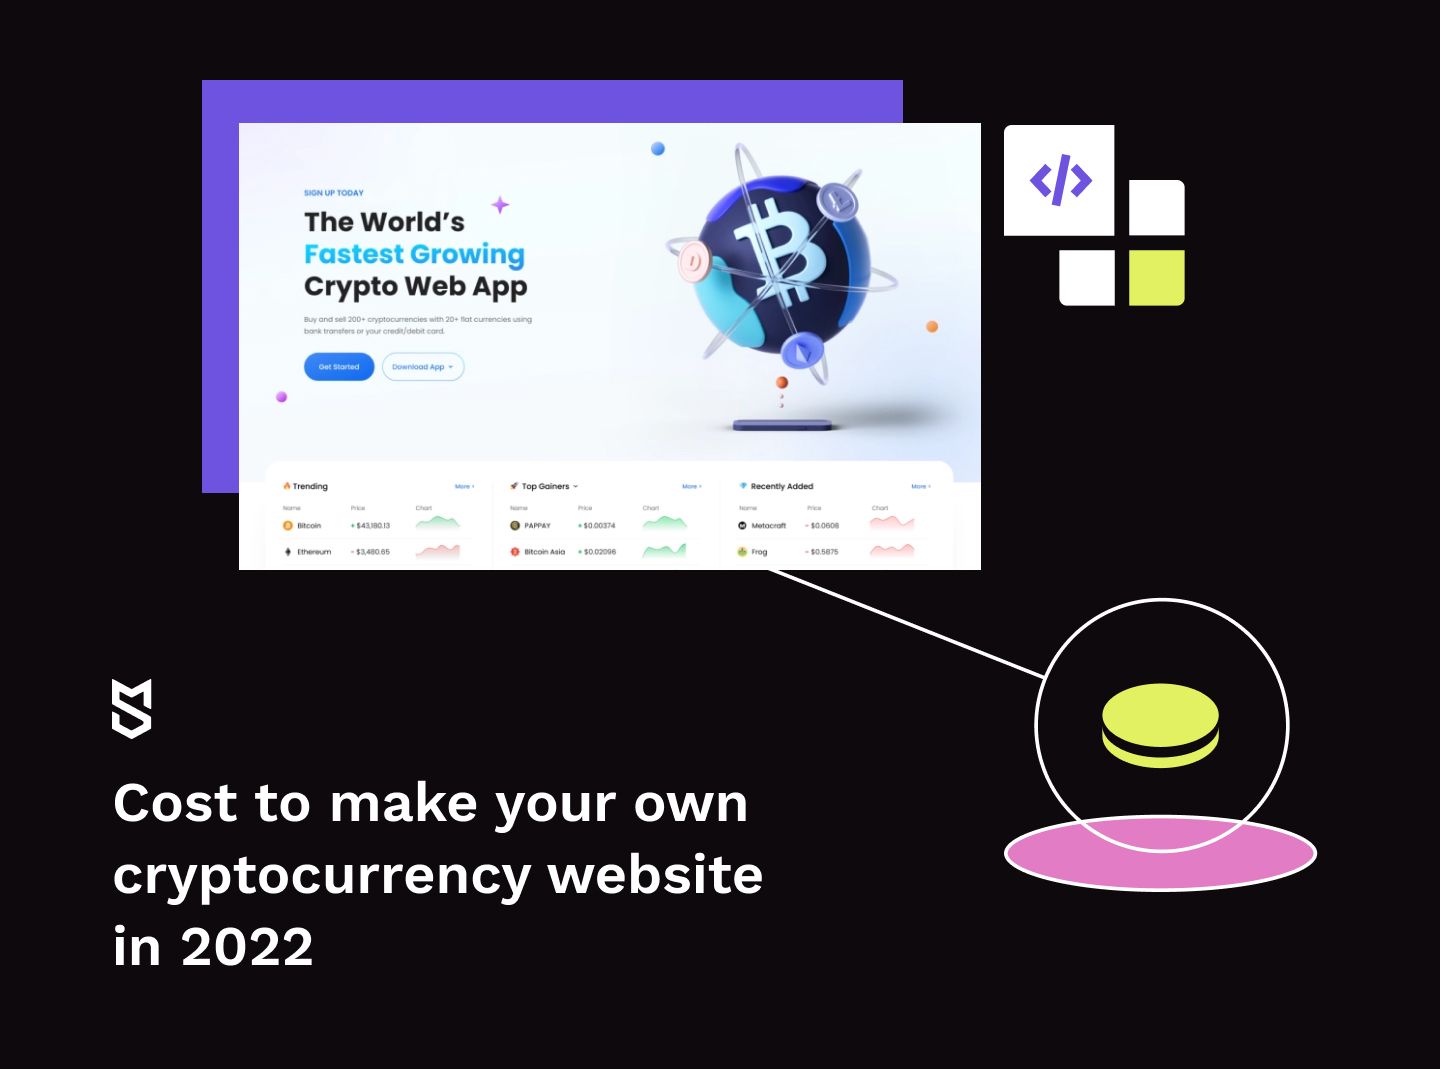 Cost to make your own cryptocurrency website in 2022